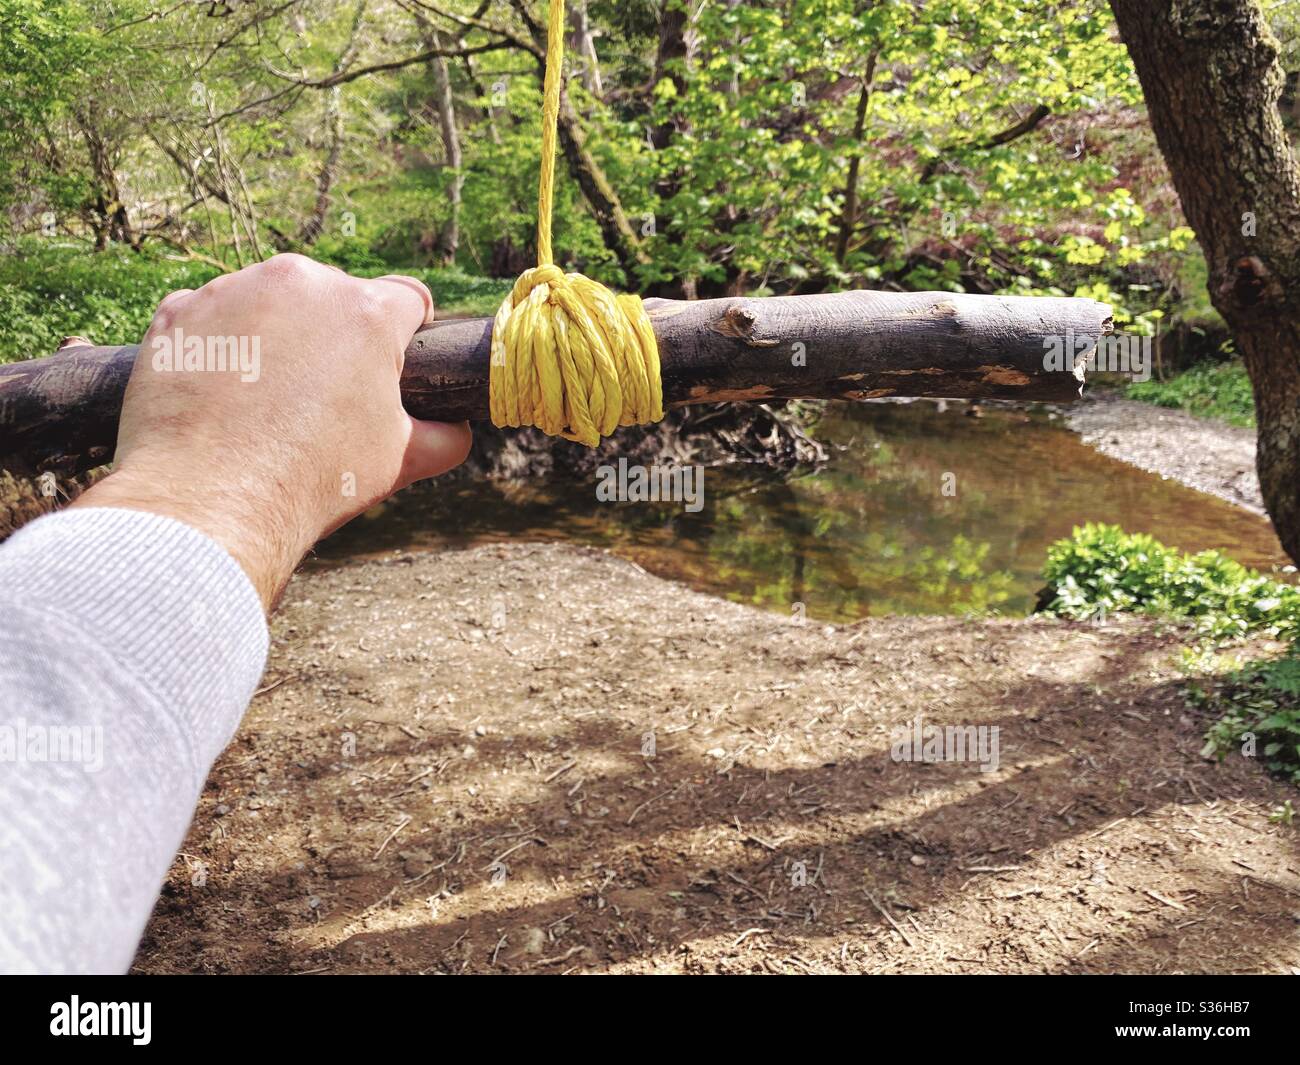 Close up details of a man holding onto a rope swing hanging from